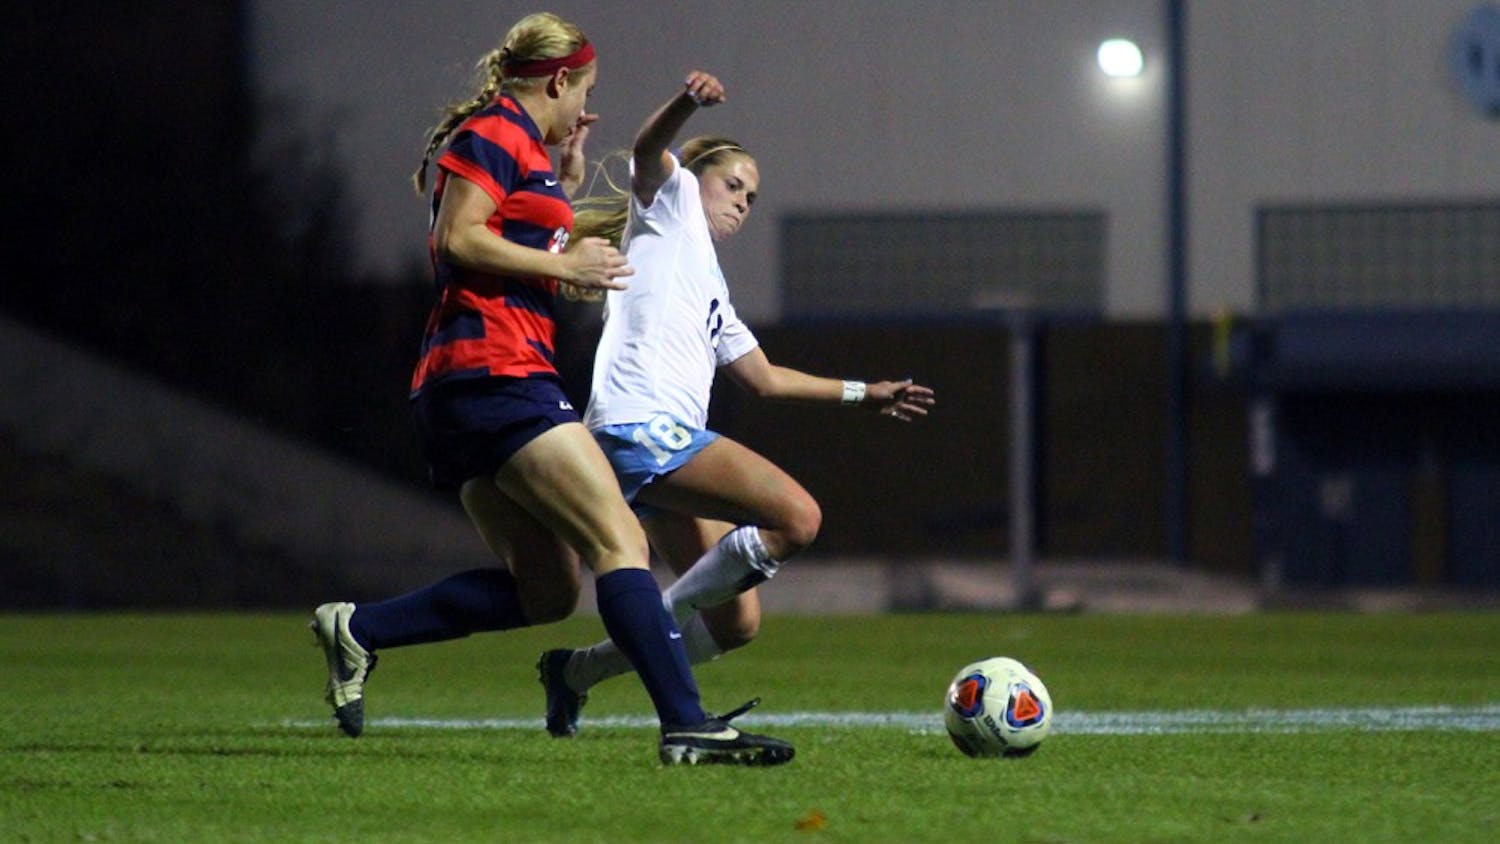 Megan Buckingham (19) chases down the ball Friday night in the first round of the NCAA tournament. The Tar Heels defeated Liberty 3-0. 